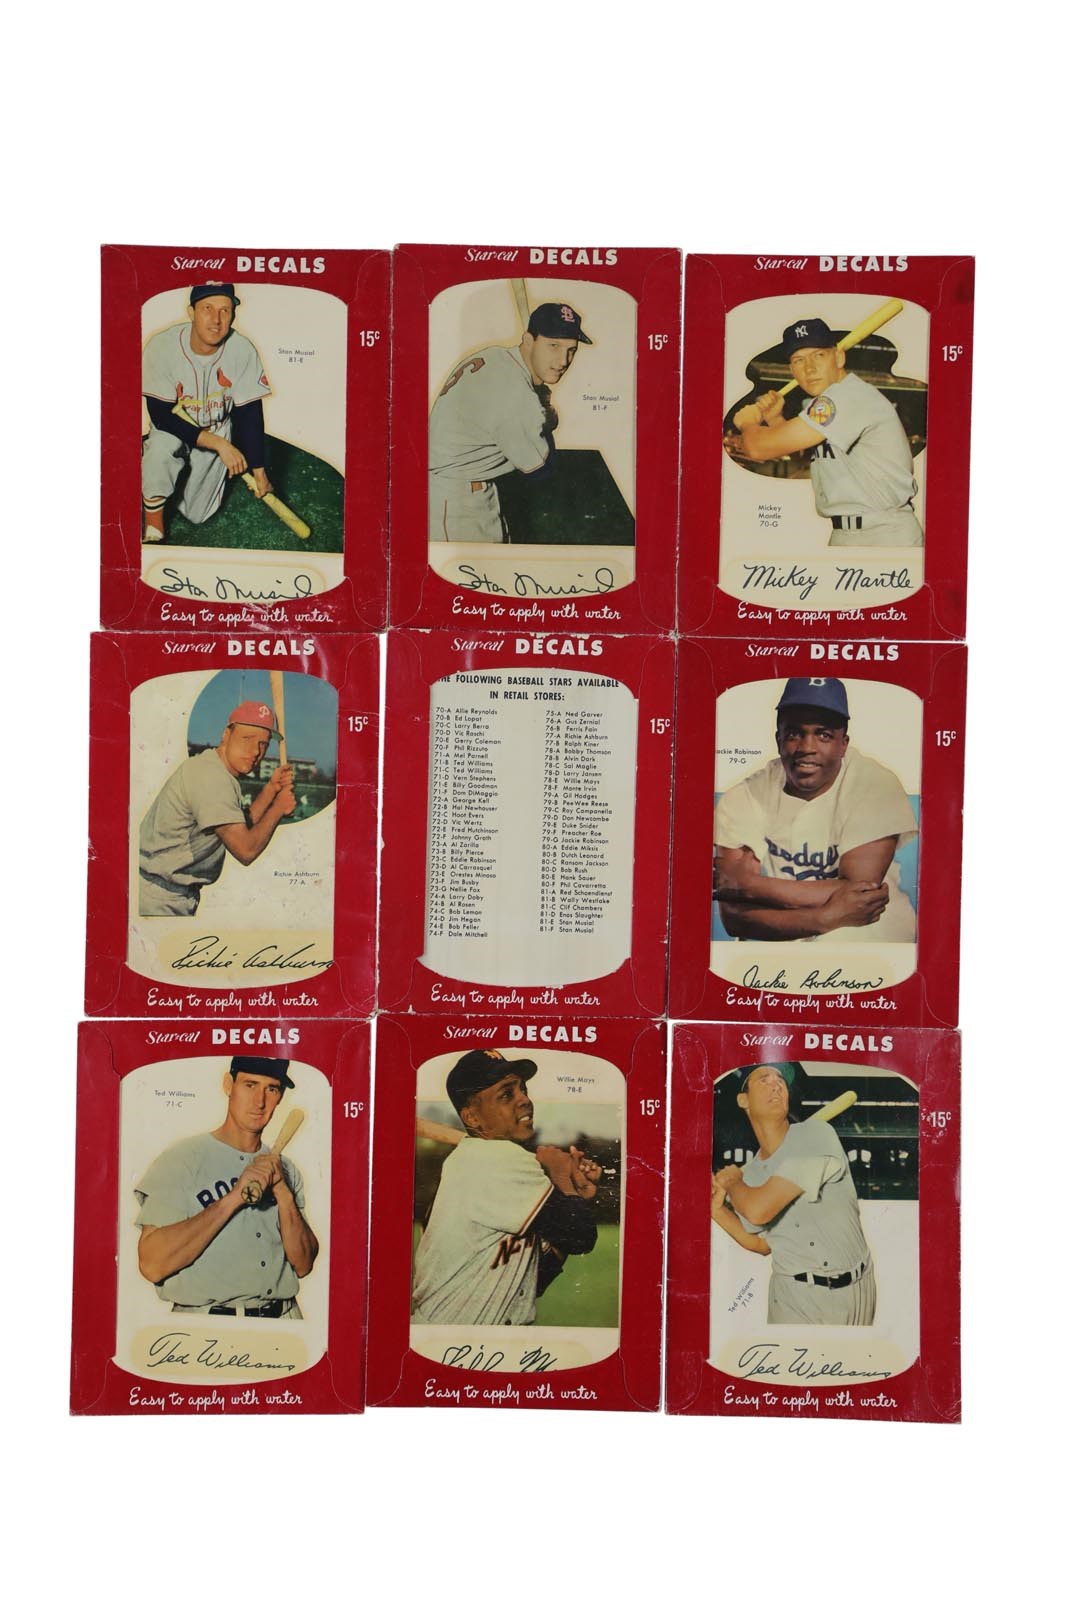 - 1952 Star-Cal Decals Type 1 Complete Set with Mickey Mantle & Checklist - Most Complete Set Ever Sold (71/71)